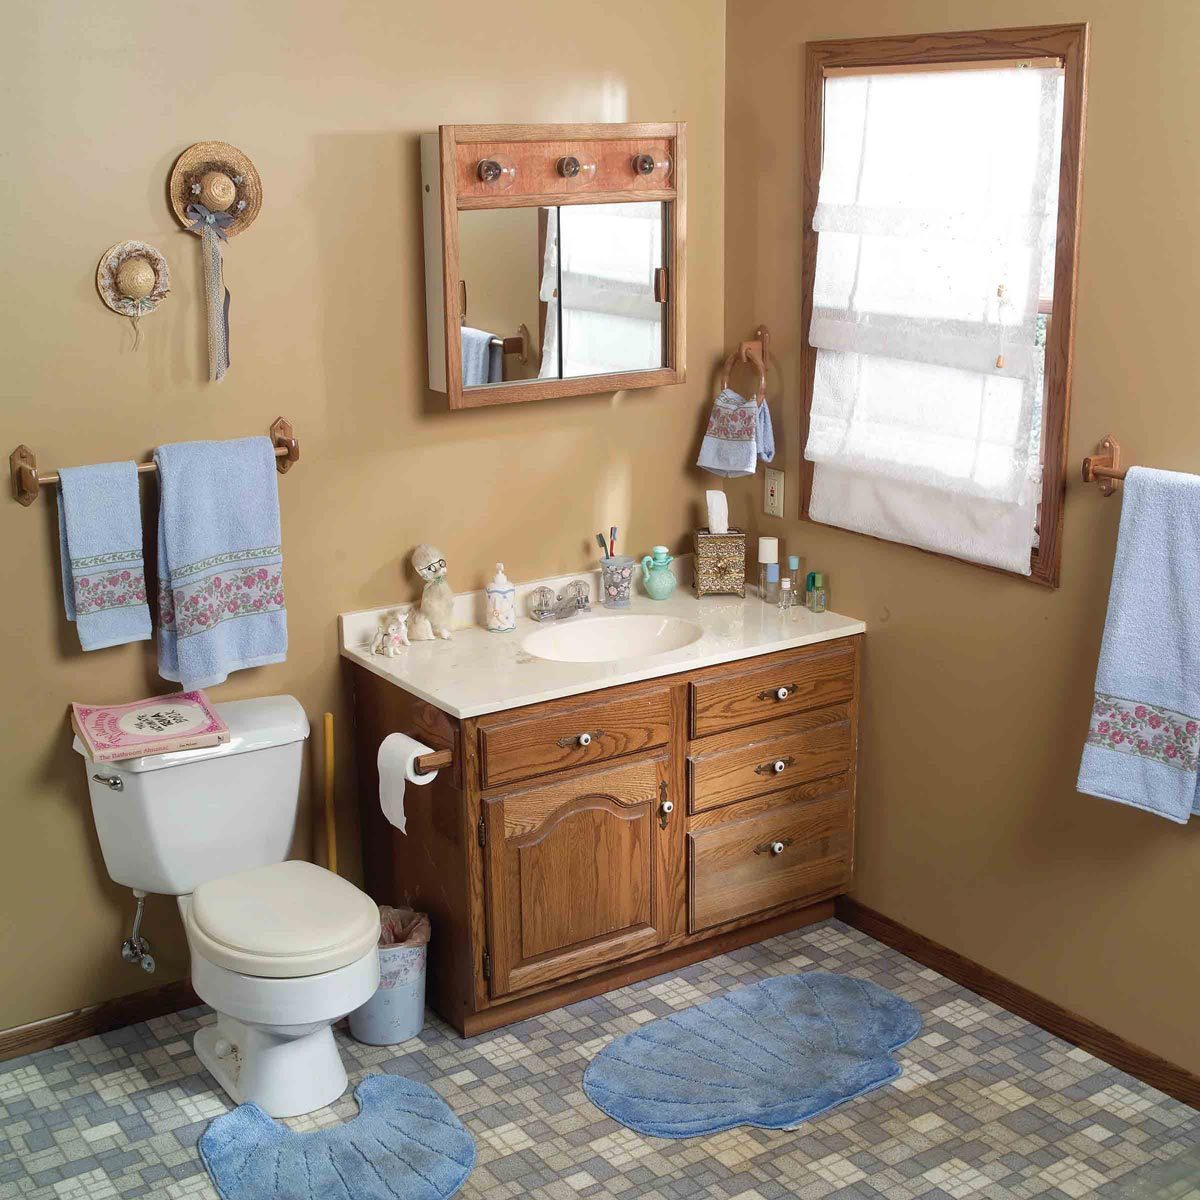 Bathroom Renovations Before And After Pics - Bathroom Before After ...